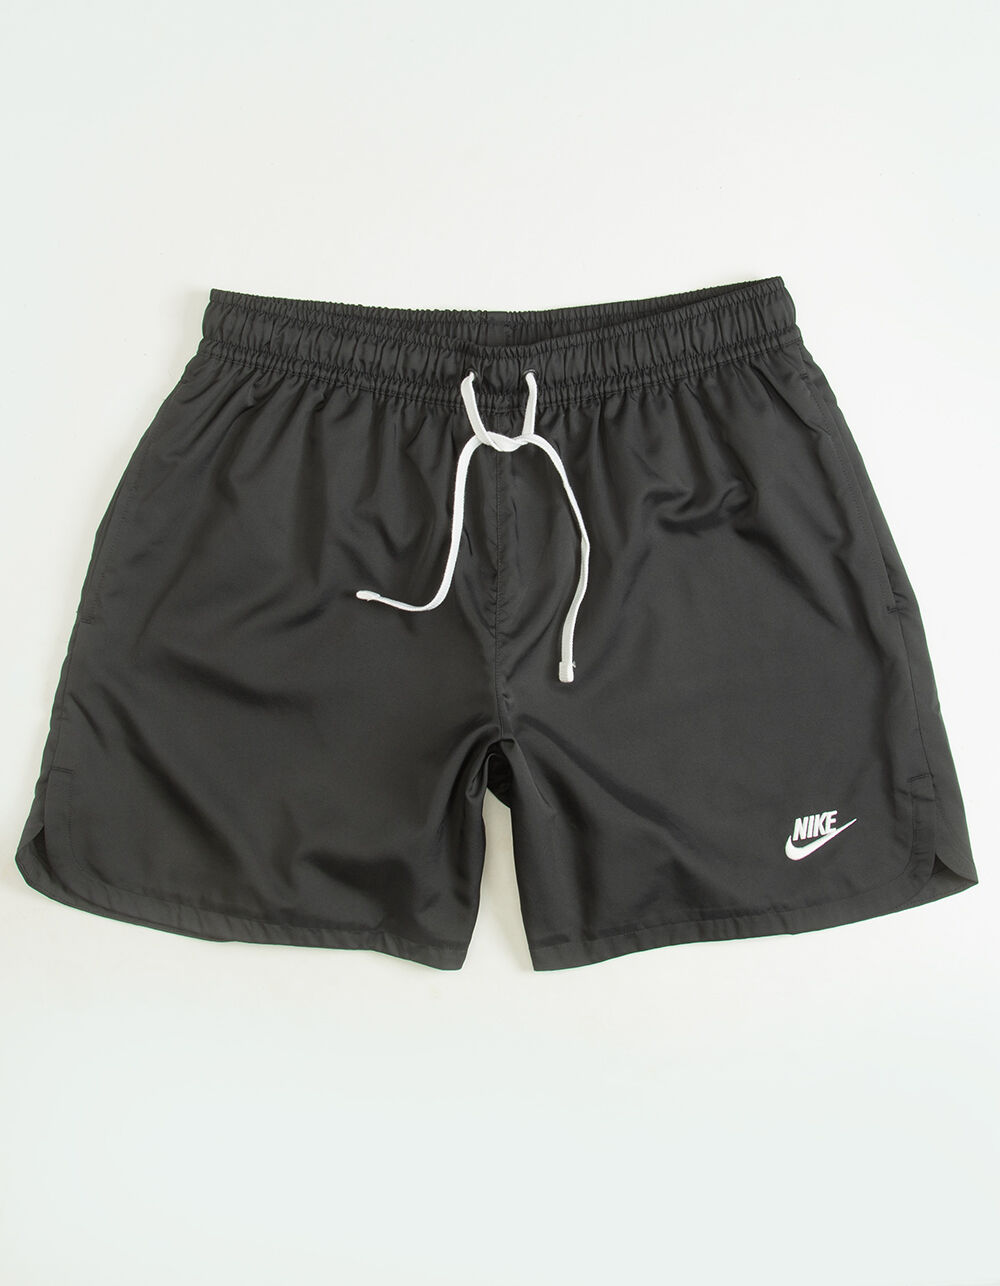 NIKE Sport Essentials Woven Lined Flow Mens Shorts - BLACK